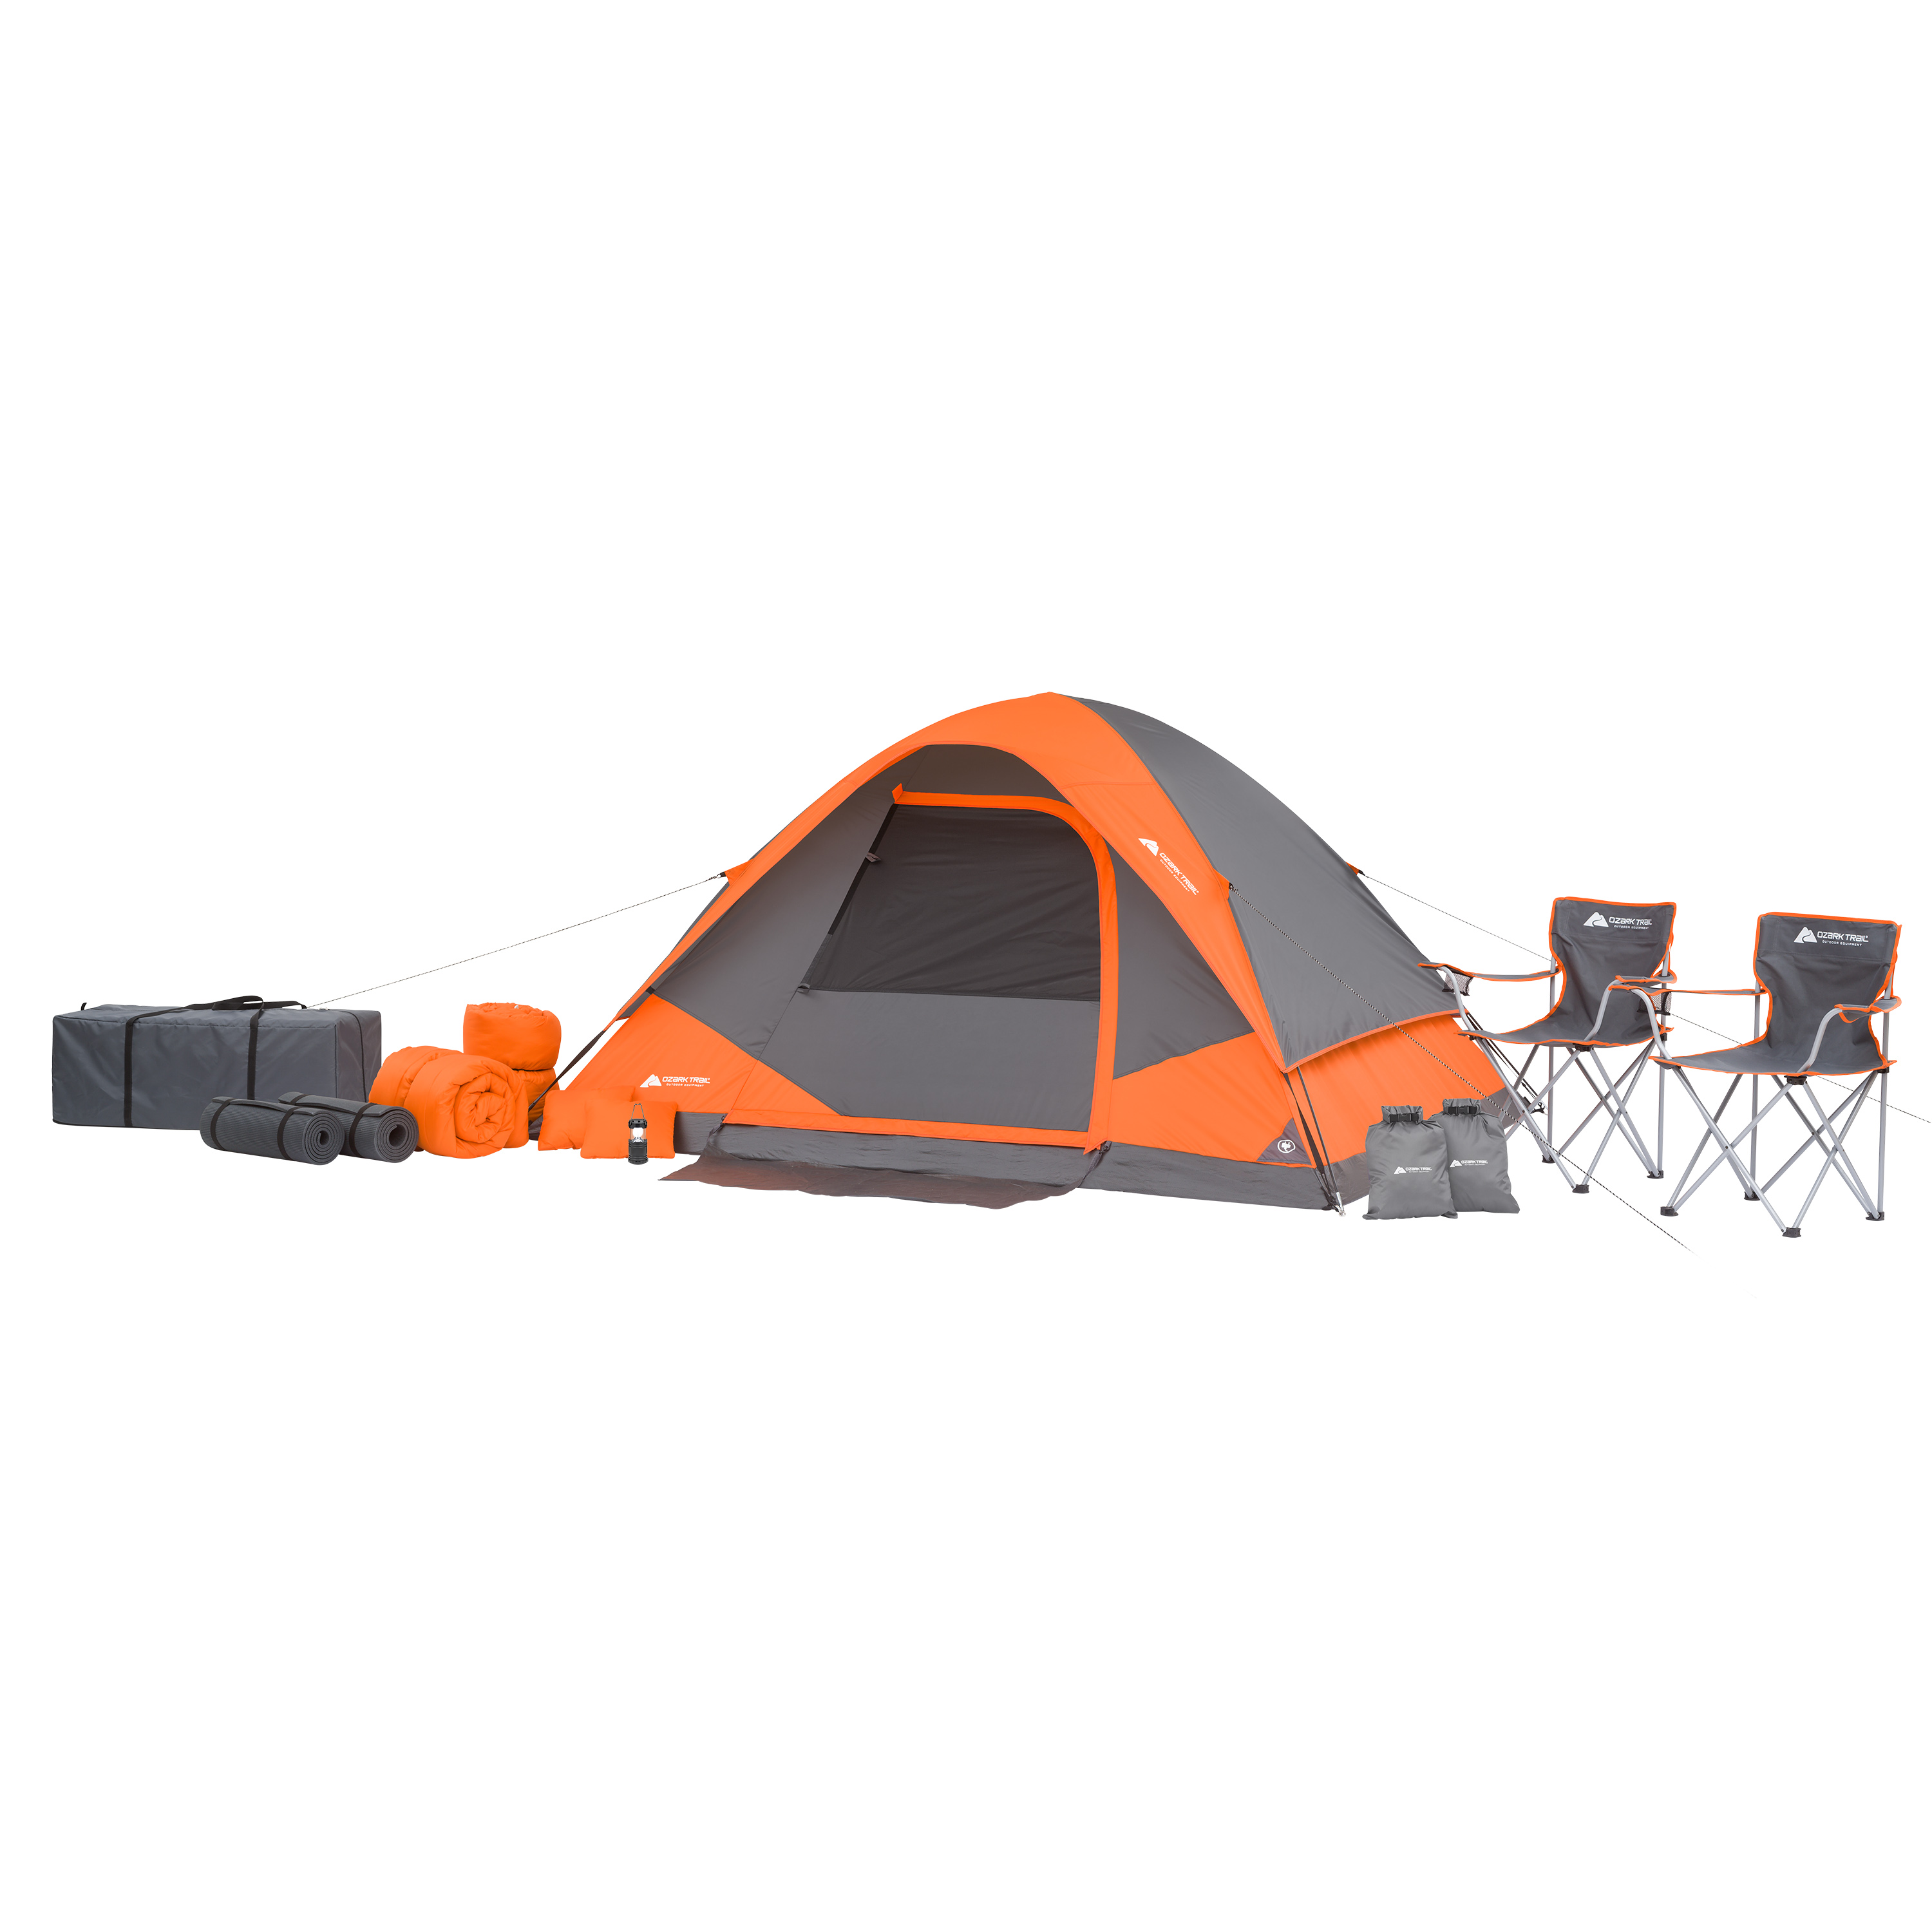 Ozark Trail 22 Piece Camping Combo Set - image 1 of 13